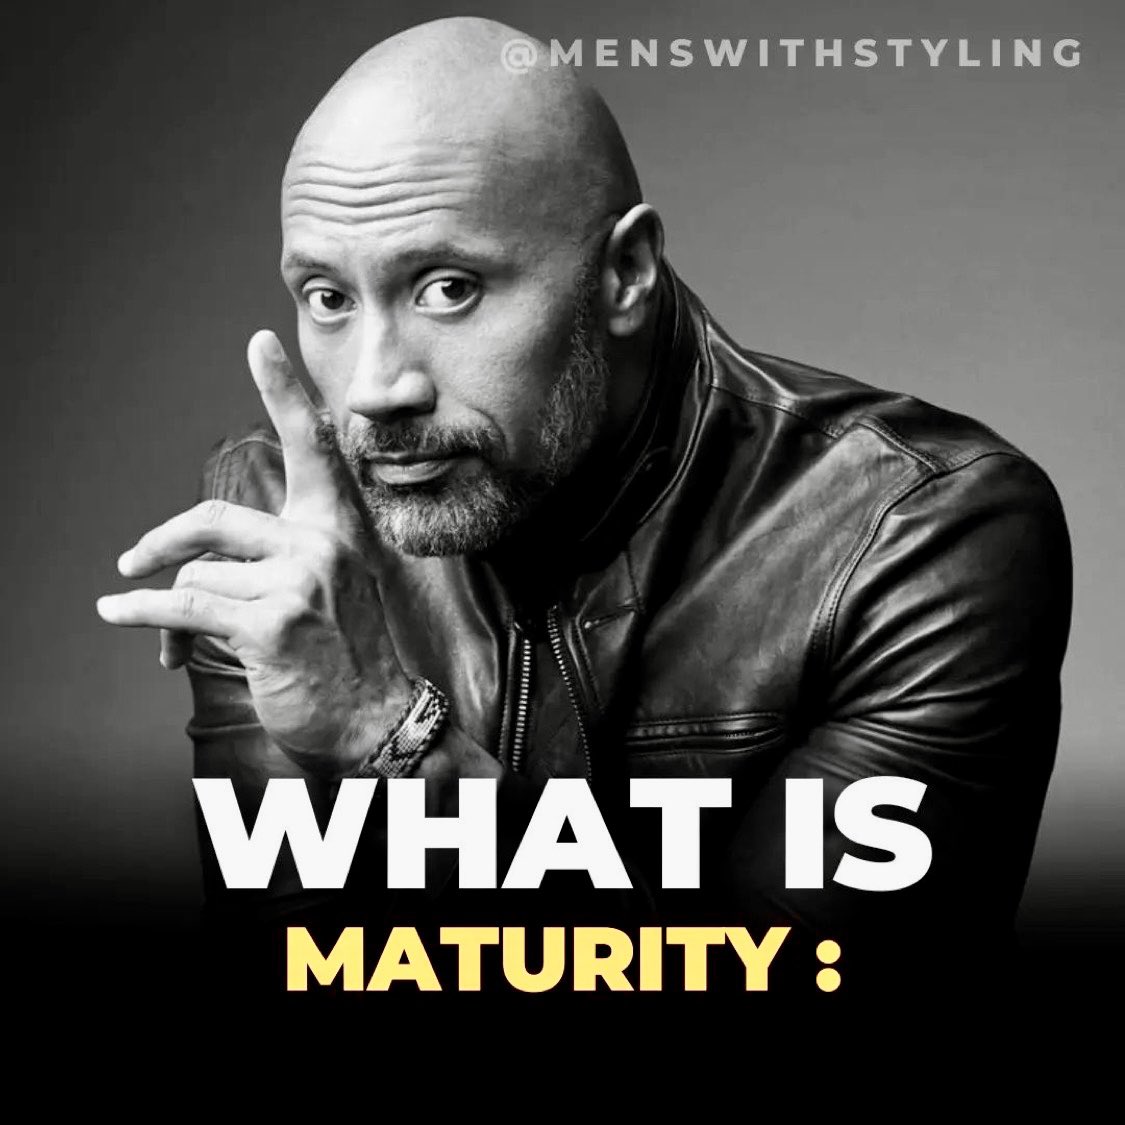 Research shows the current average age of maturity into adult is approximately 28.
Credit:
@mensoutfitsguide
================
#dailybloggergoals #dapperoutfits #modernmen #mensfashionteam #menshairs #sprezza #beststyle #maturity #outfitgrids #trending